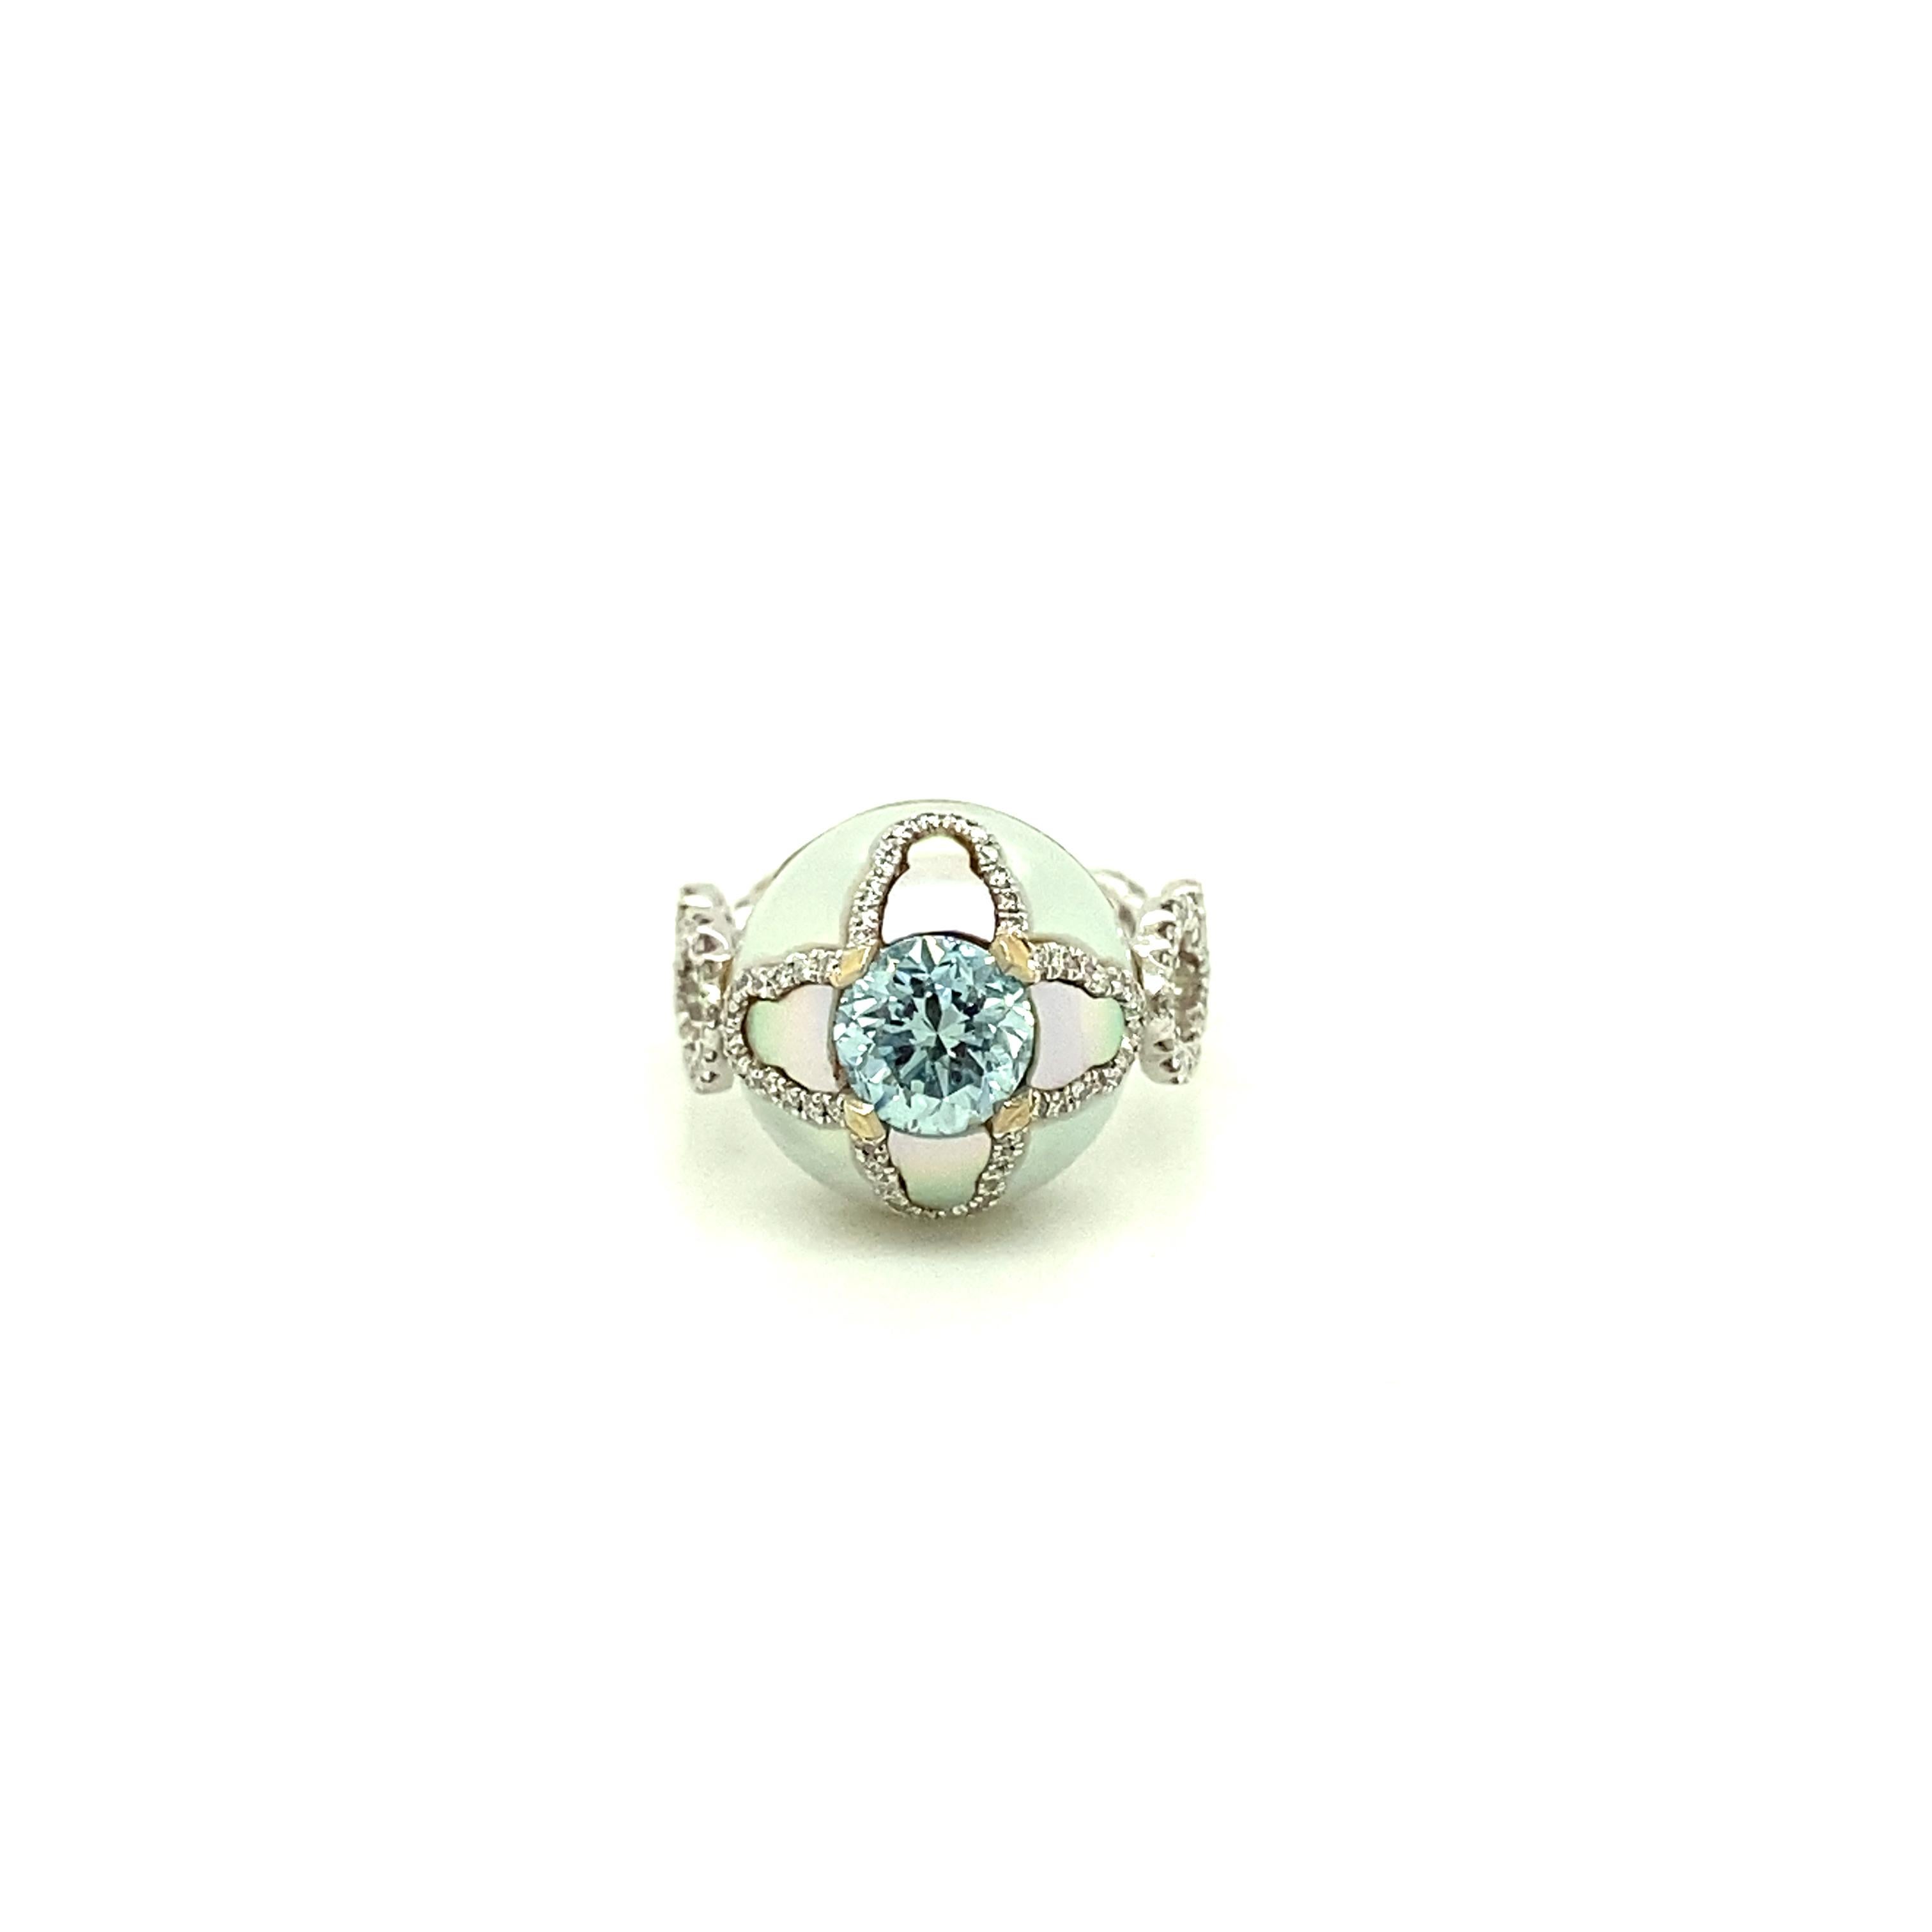 1.05 Carat EGL Certified Enhanced Fancy Blue Diamond and White Diamond Ring:

A unique ring, it features an EGL certified colour-enhanced fancy blue diamond weighing 1.05 carat inlayed and surrounded by numerous white round-brilliant cut diamonds